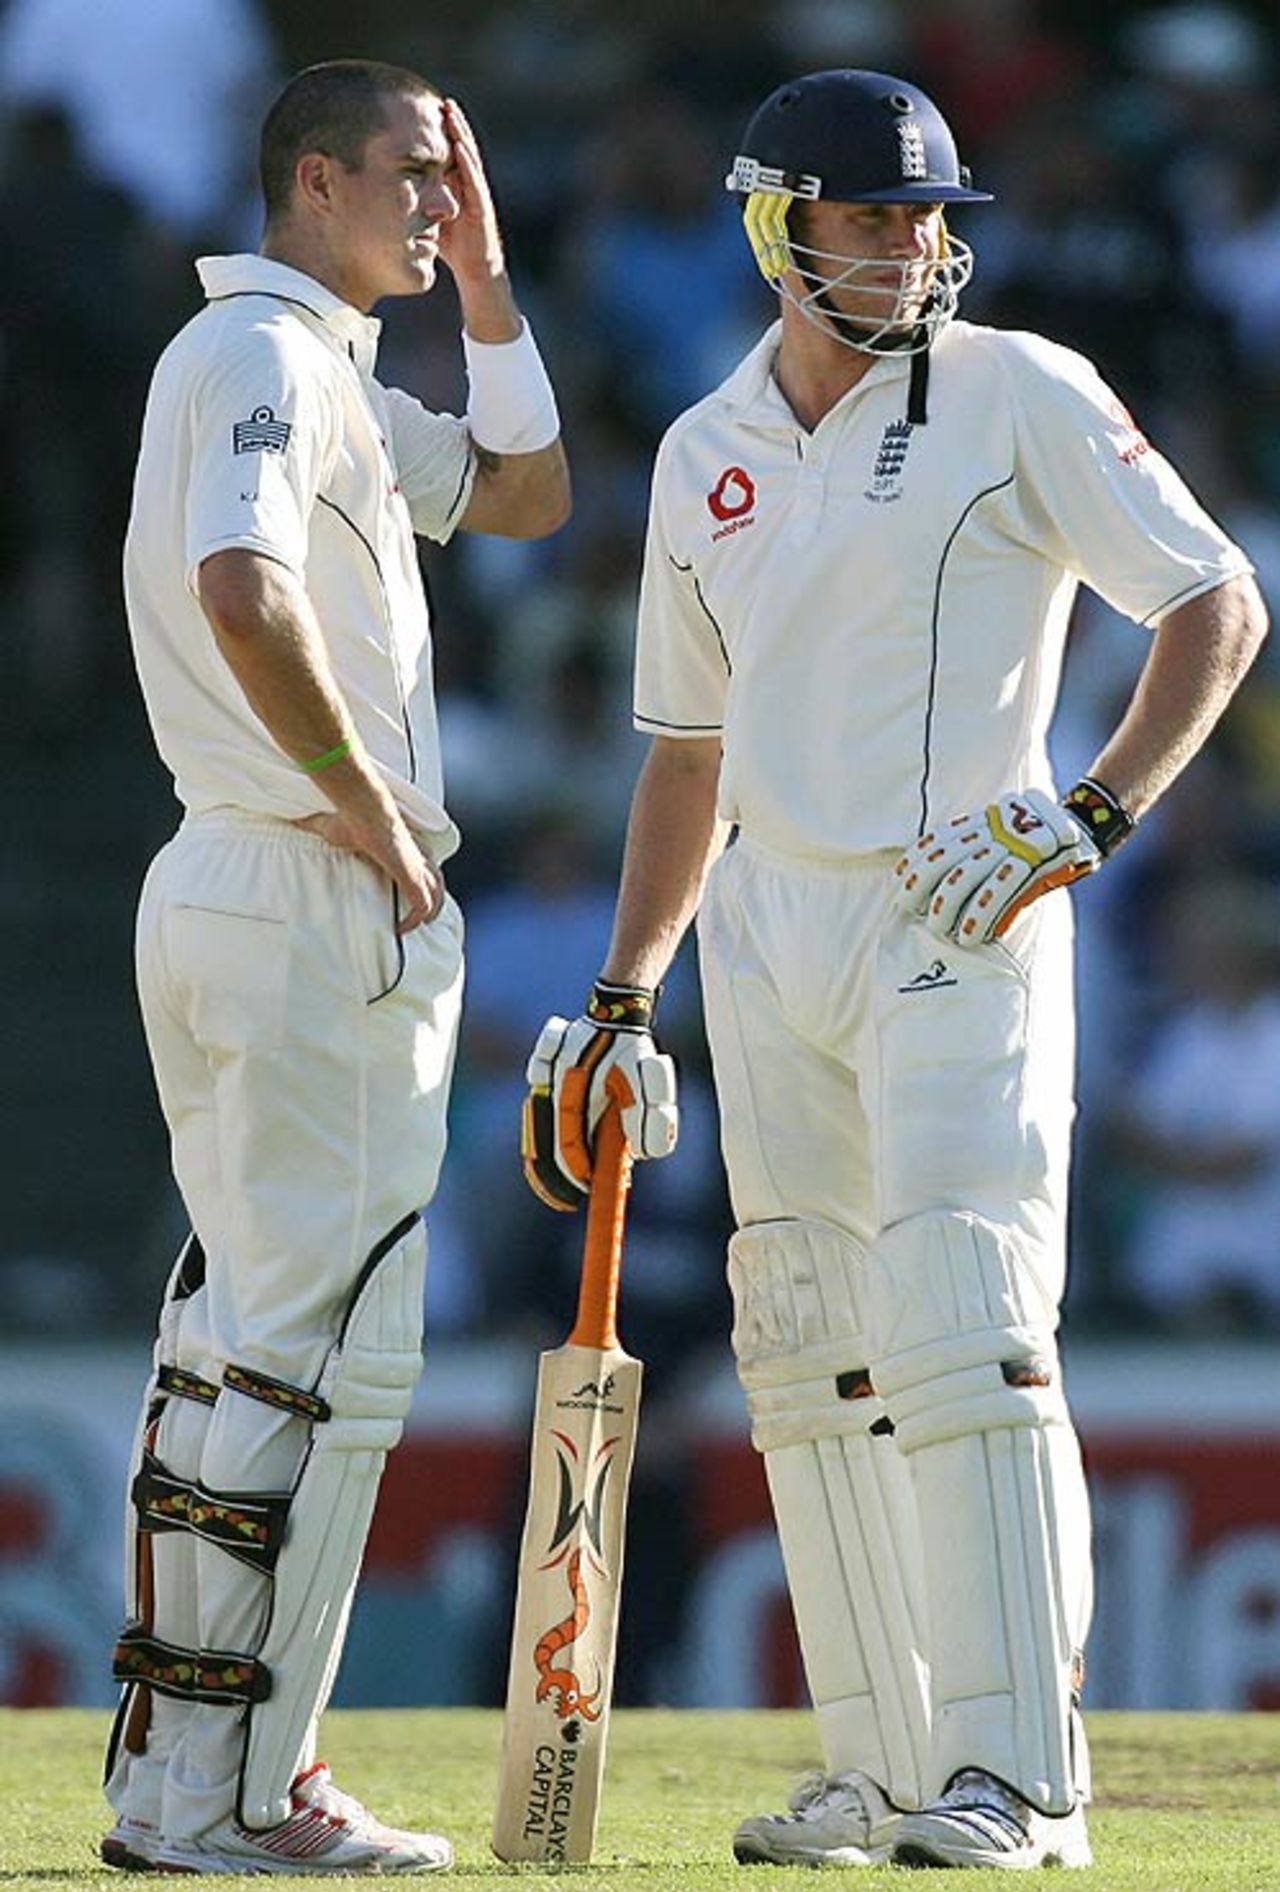 Kevin Pietersen and Andrew Flintoff contemplate how to avoid an Ashes whitewash, Australia v England, 5th Test, Sydney, January 4, 2007